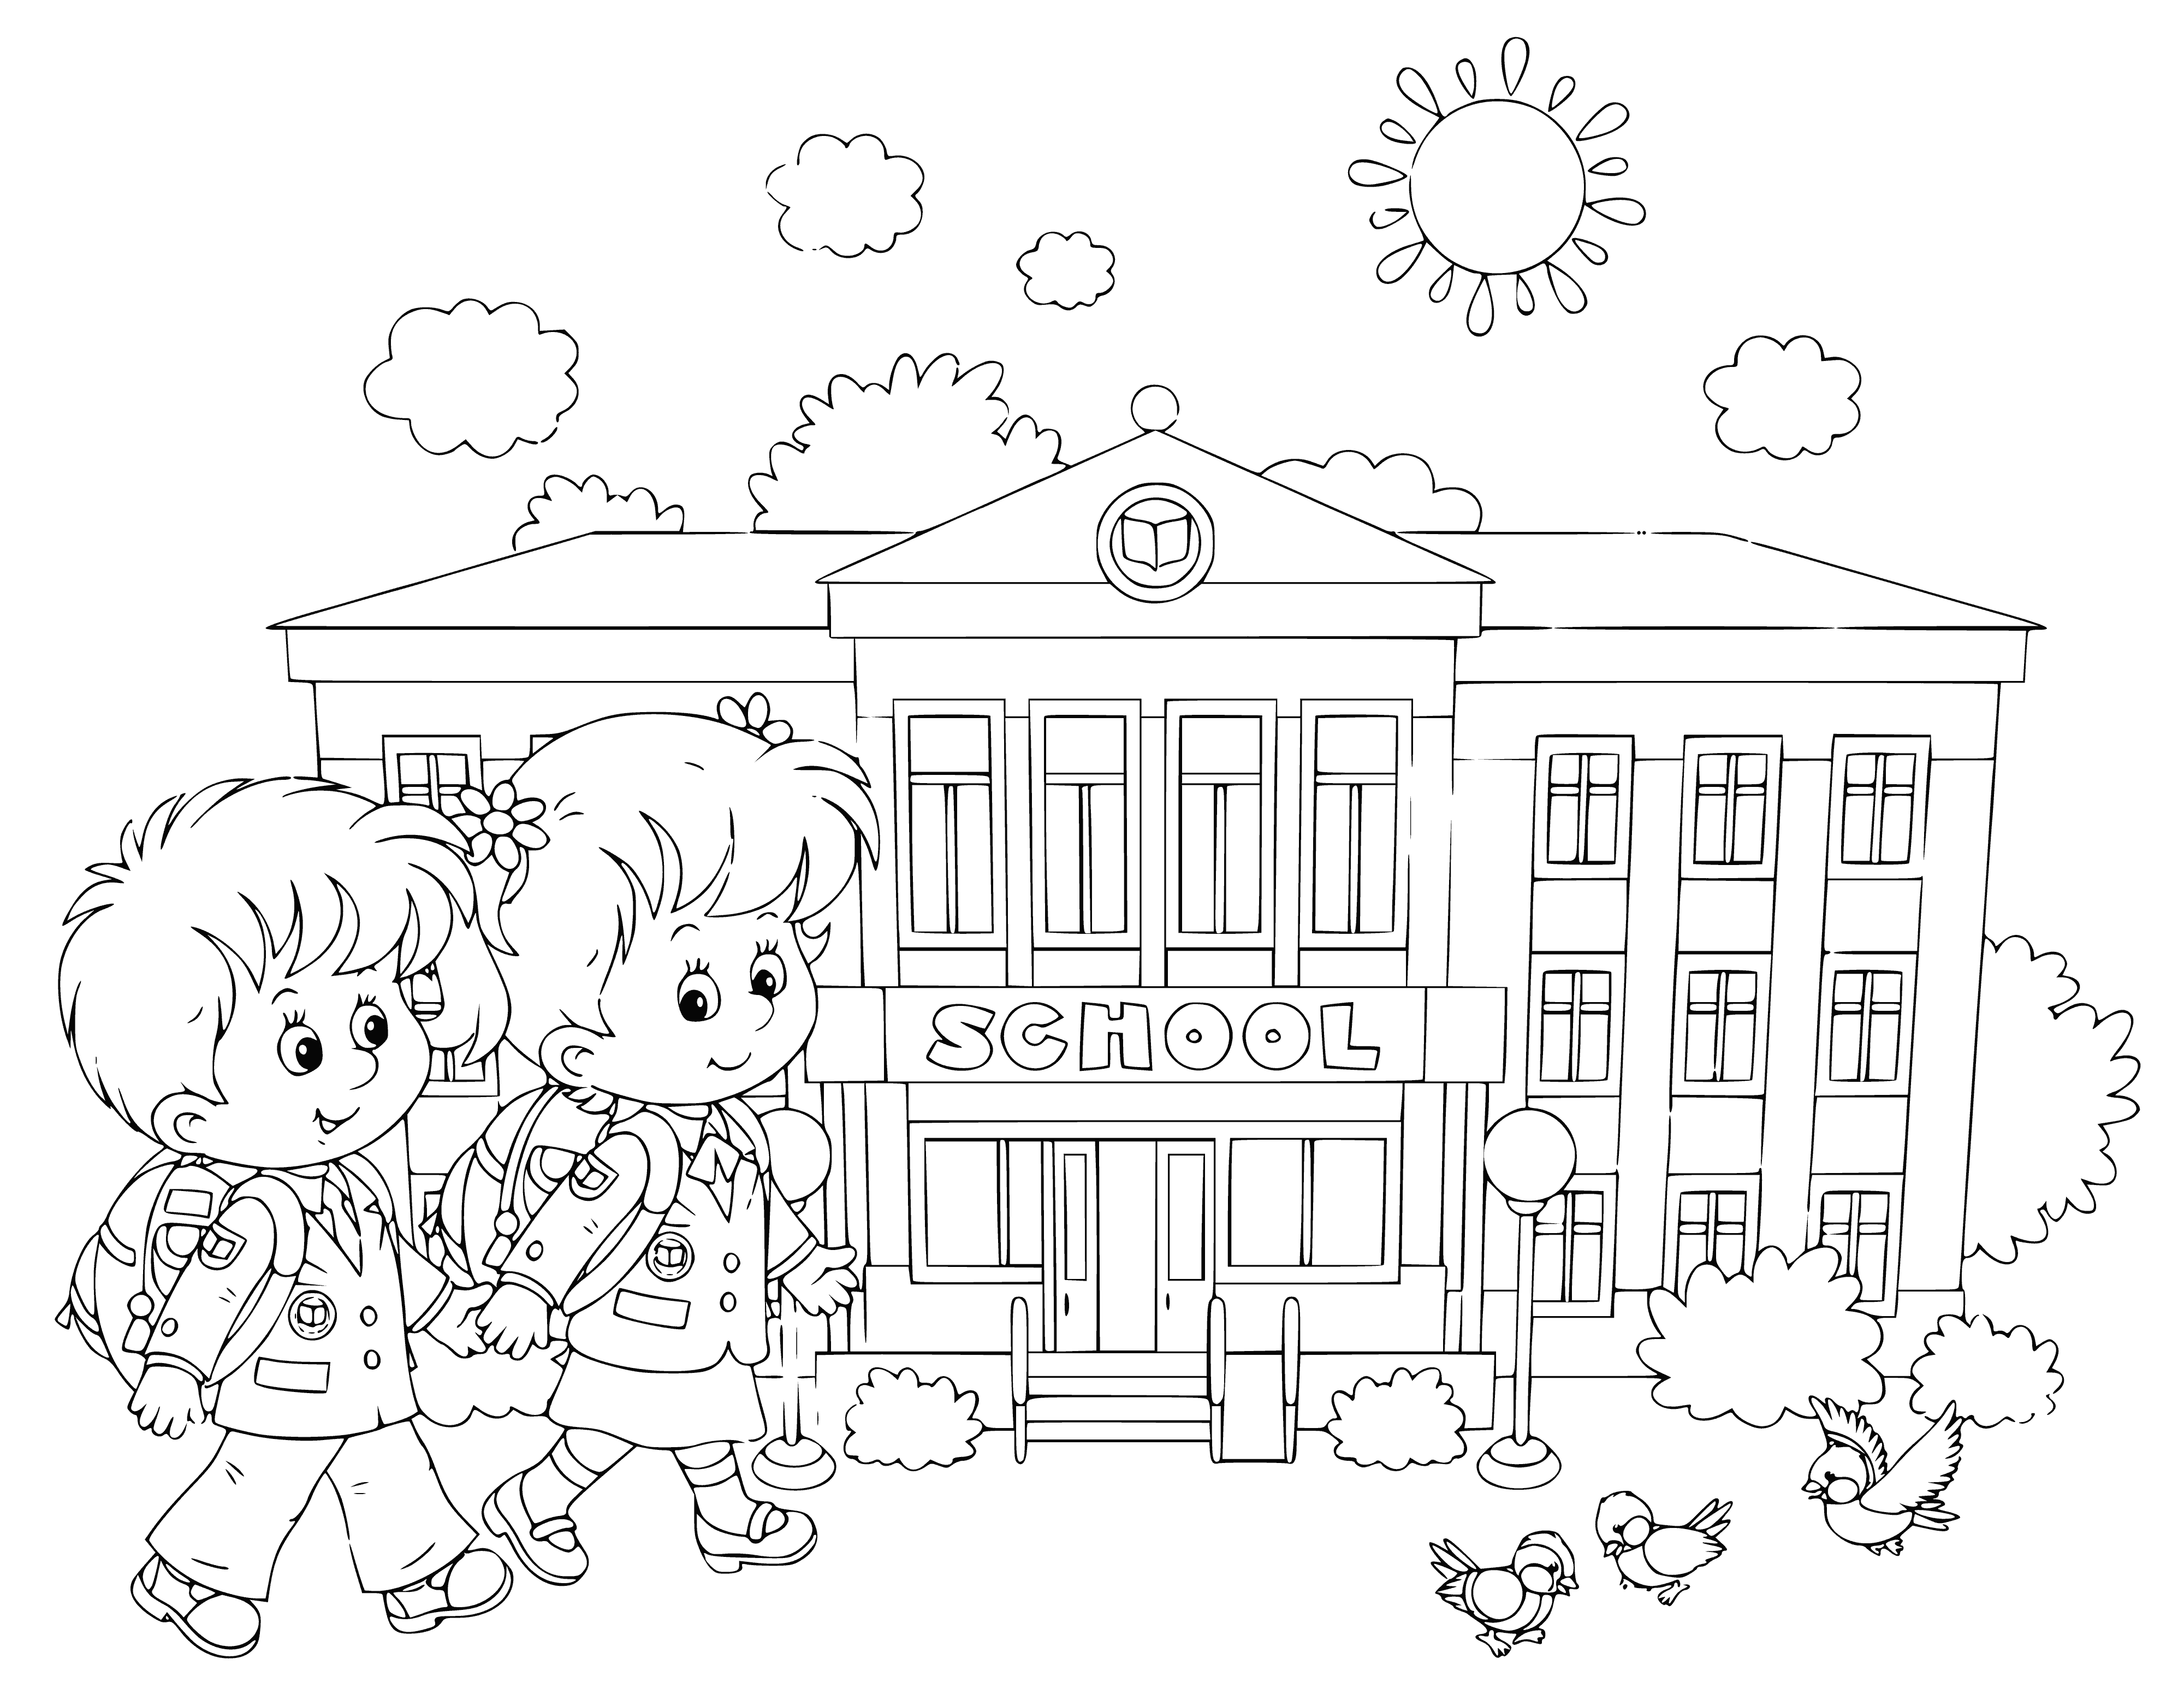 Boy and girl go to school coloring page